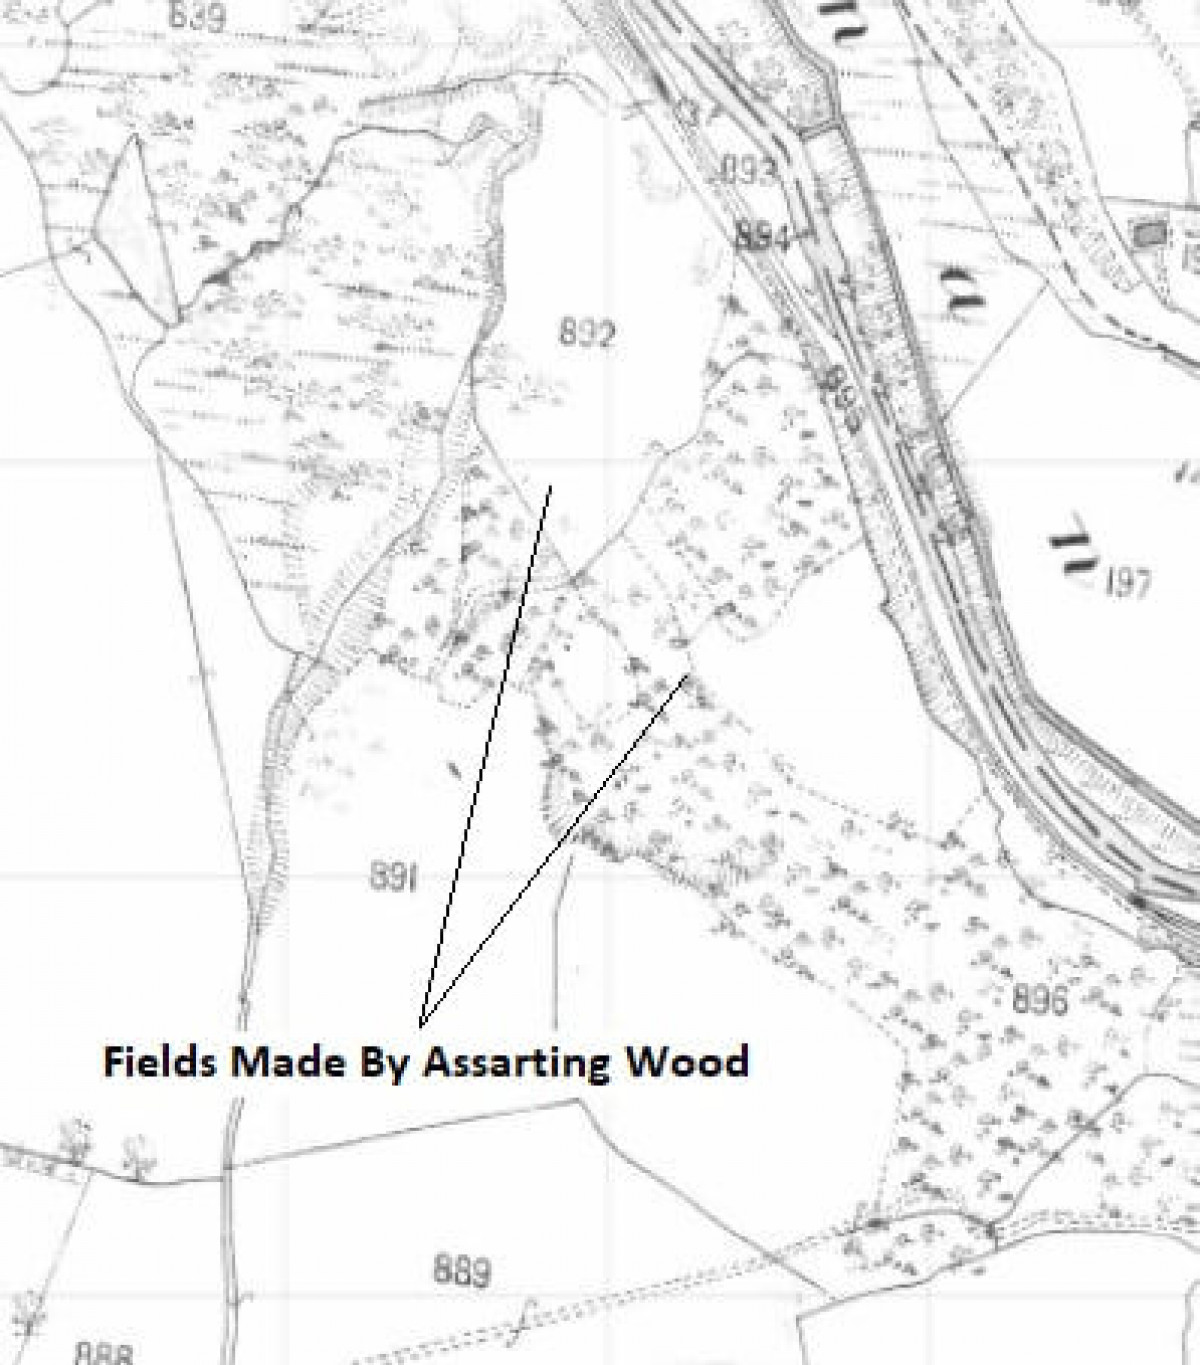 Fields Made By Cutting Back Wood At Coed Olaf In Nineteenth Century